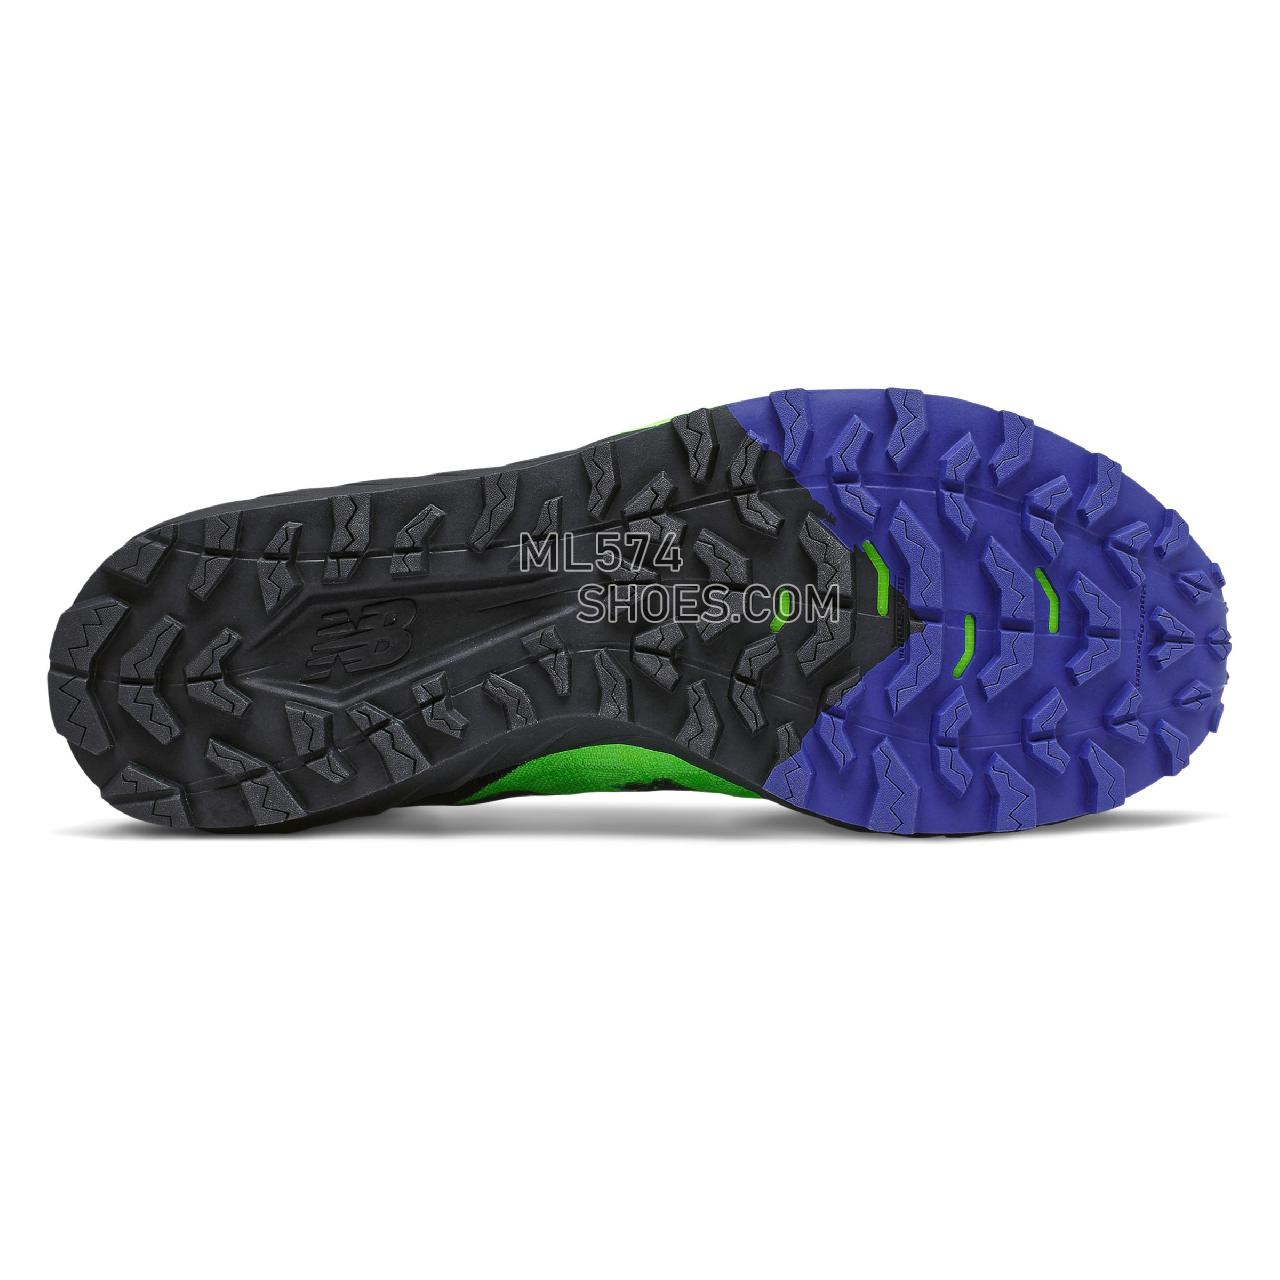 New Balance Summit Unknown v2 - Men's Trail Running - Energy Lime with Black - MTUNKNY2